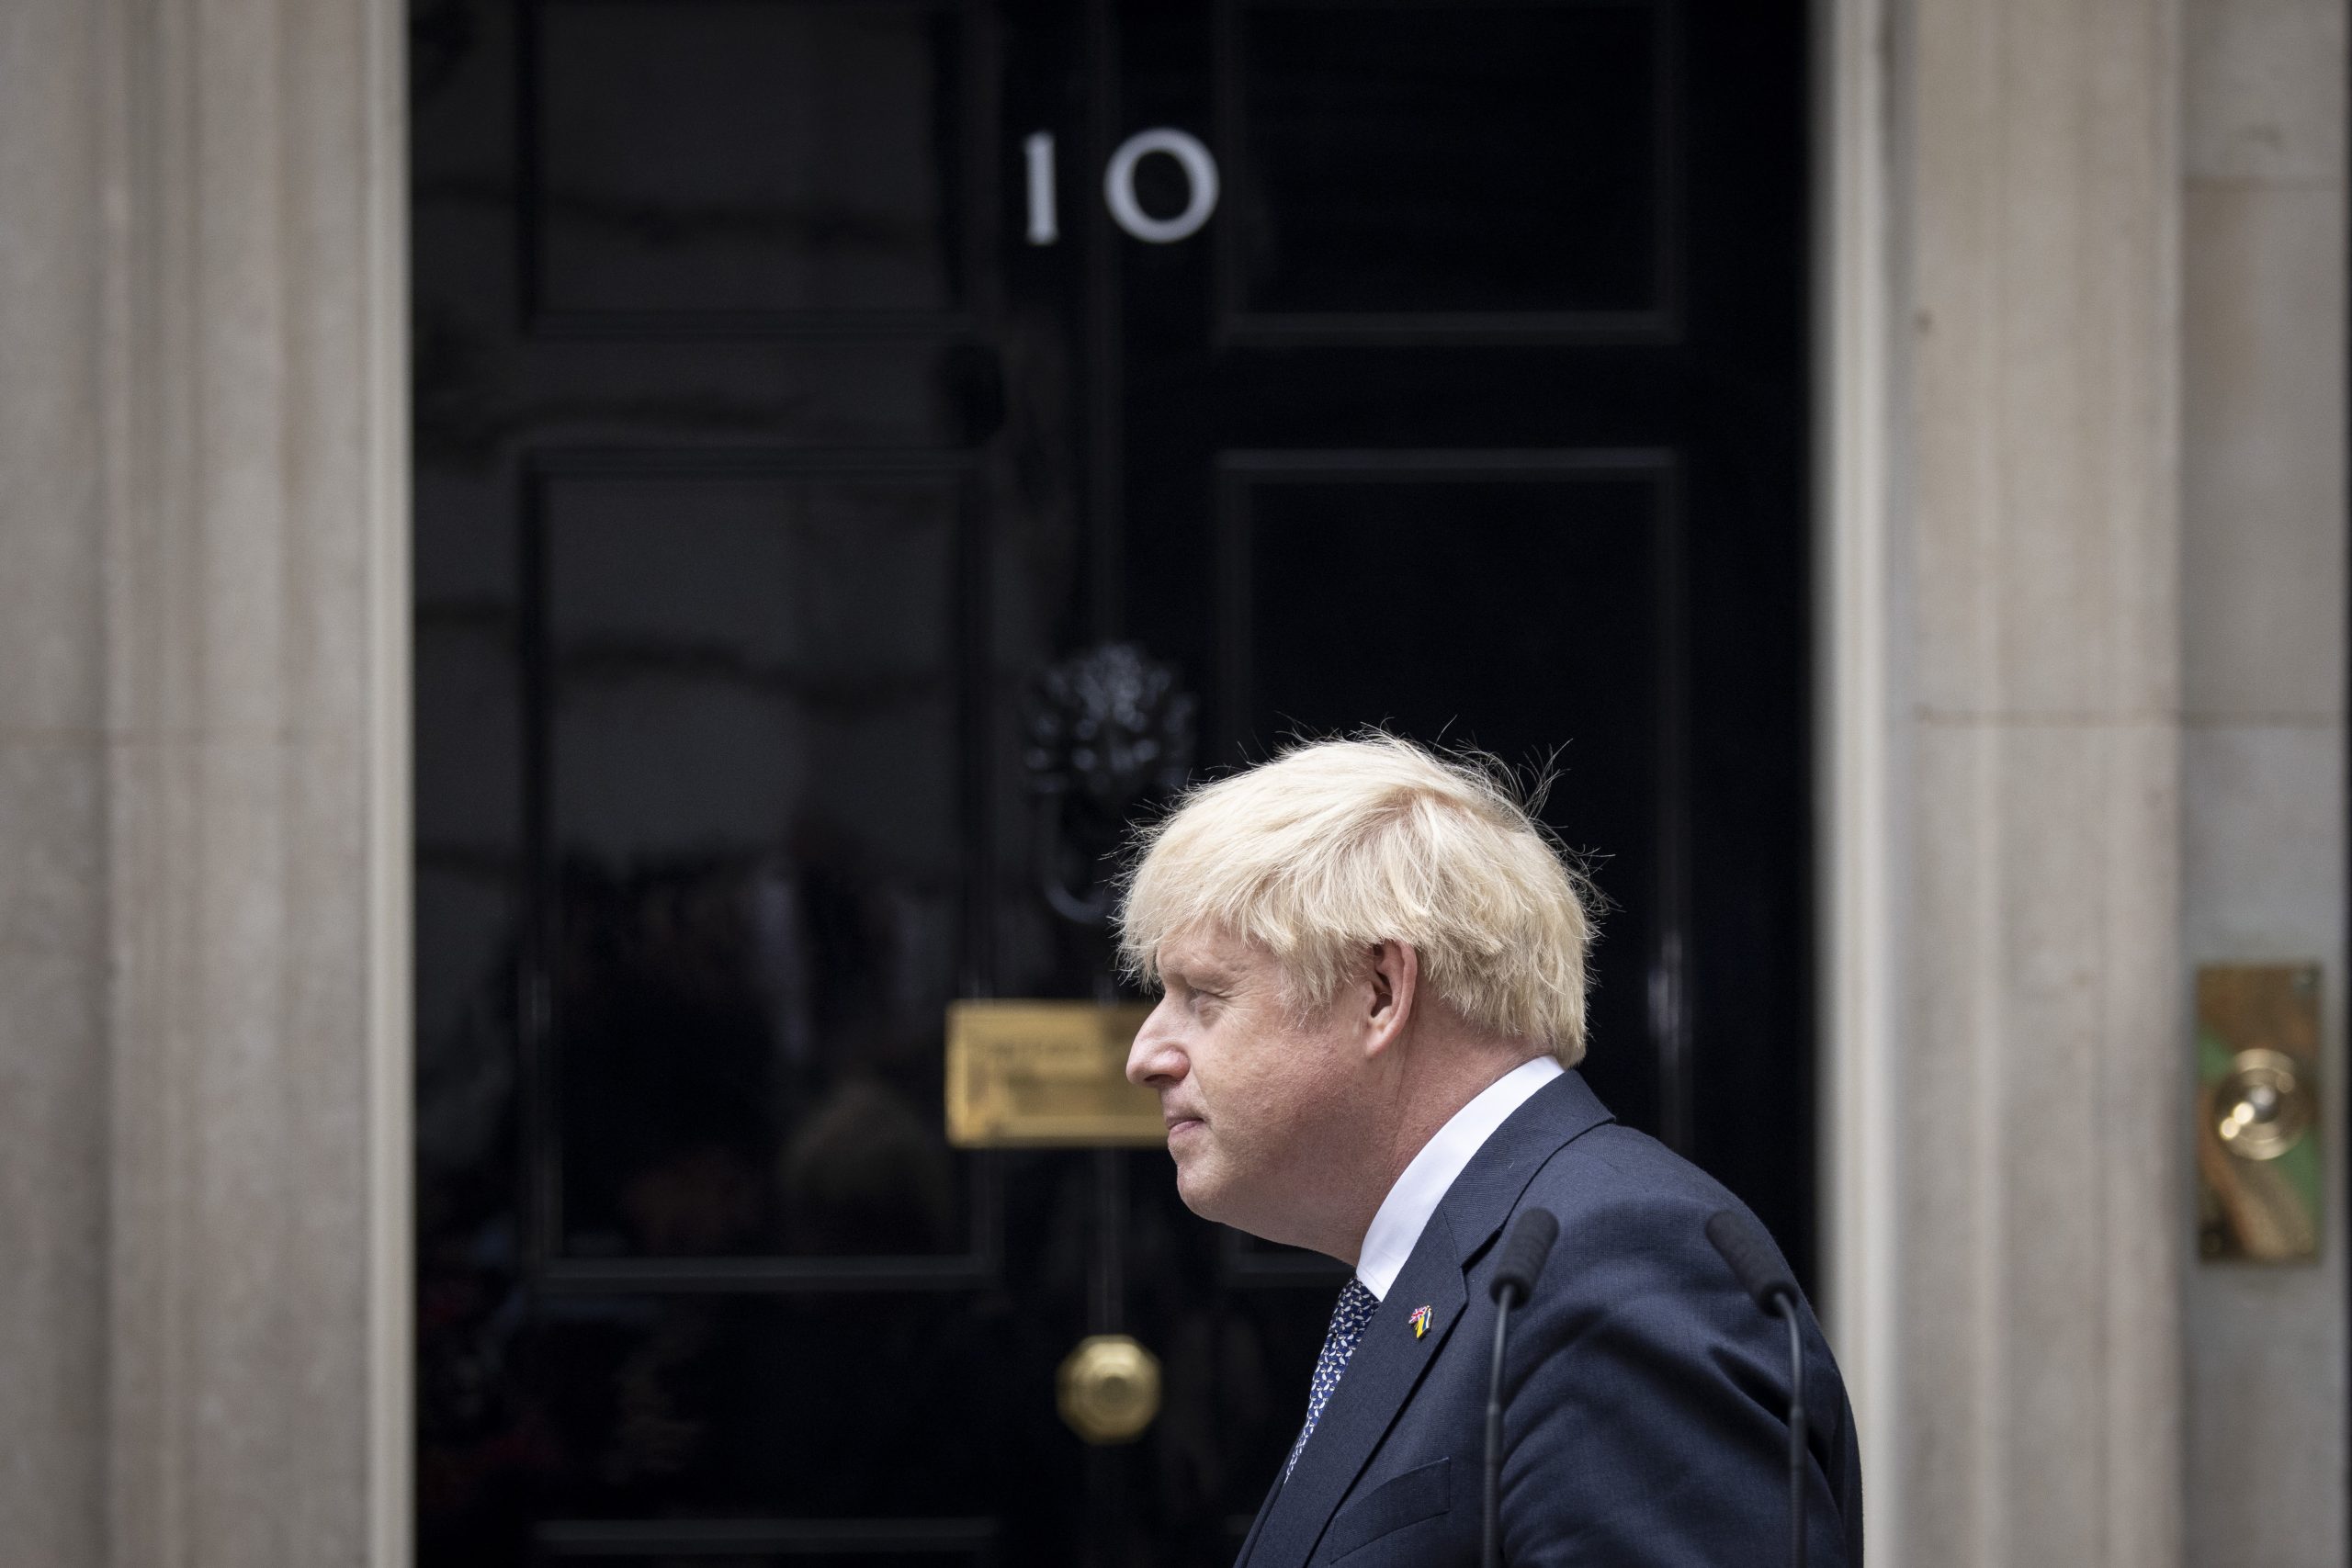 epa10682418 Former British Prime Minister Boris Johnson leaves after announcing his resignation as leader of the Conservative Party in Downing Street, London, Britain, 07 July 2022 (reissued on 09 June 2023). Boris Johnson announced on 09 June that he will be standing down from parliament with immediate effect, after the Privileges Committee investigation into the Partygate scandal recommended a suspension for his conduct..  EPA/TOLGA AKMEN